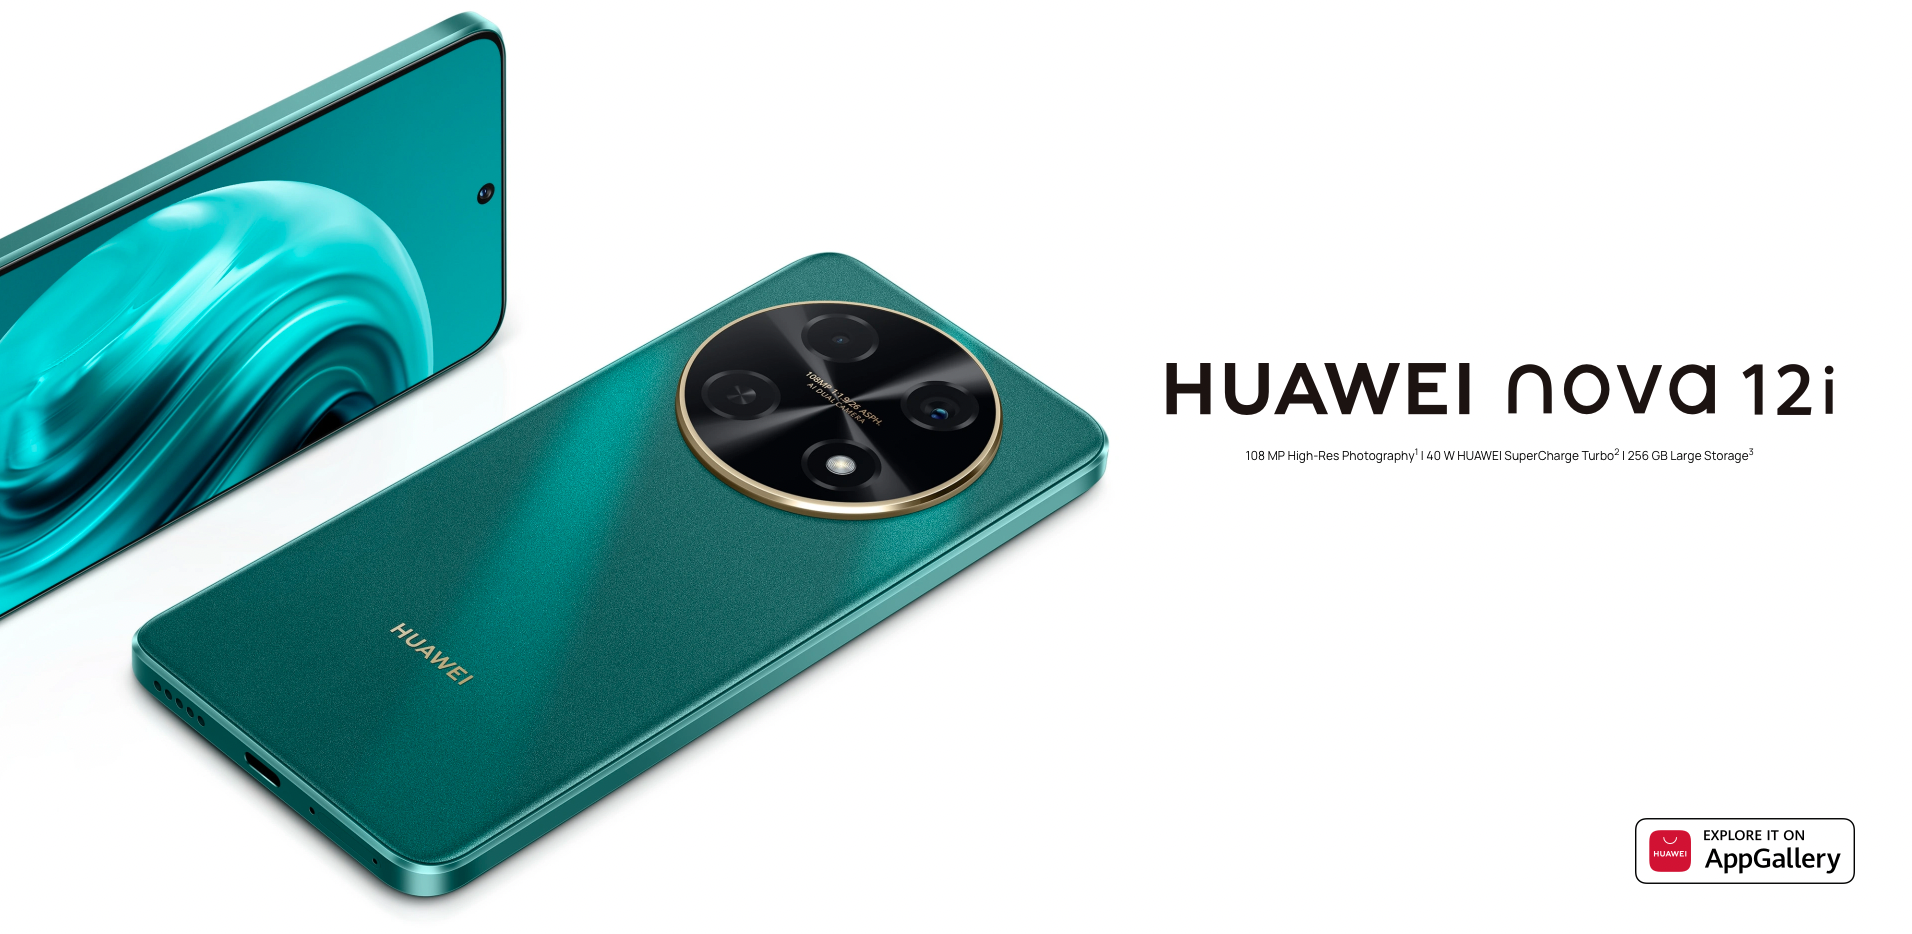 Huawei Nova 12i: 90Hz OLED display, Snapdragon 680 chip, 108 MP camera and 5000 mAh battery with 40W charging